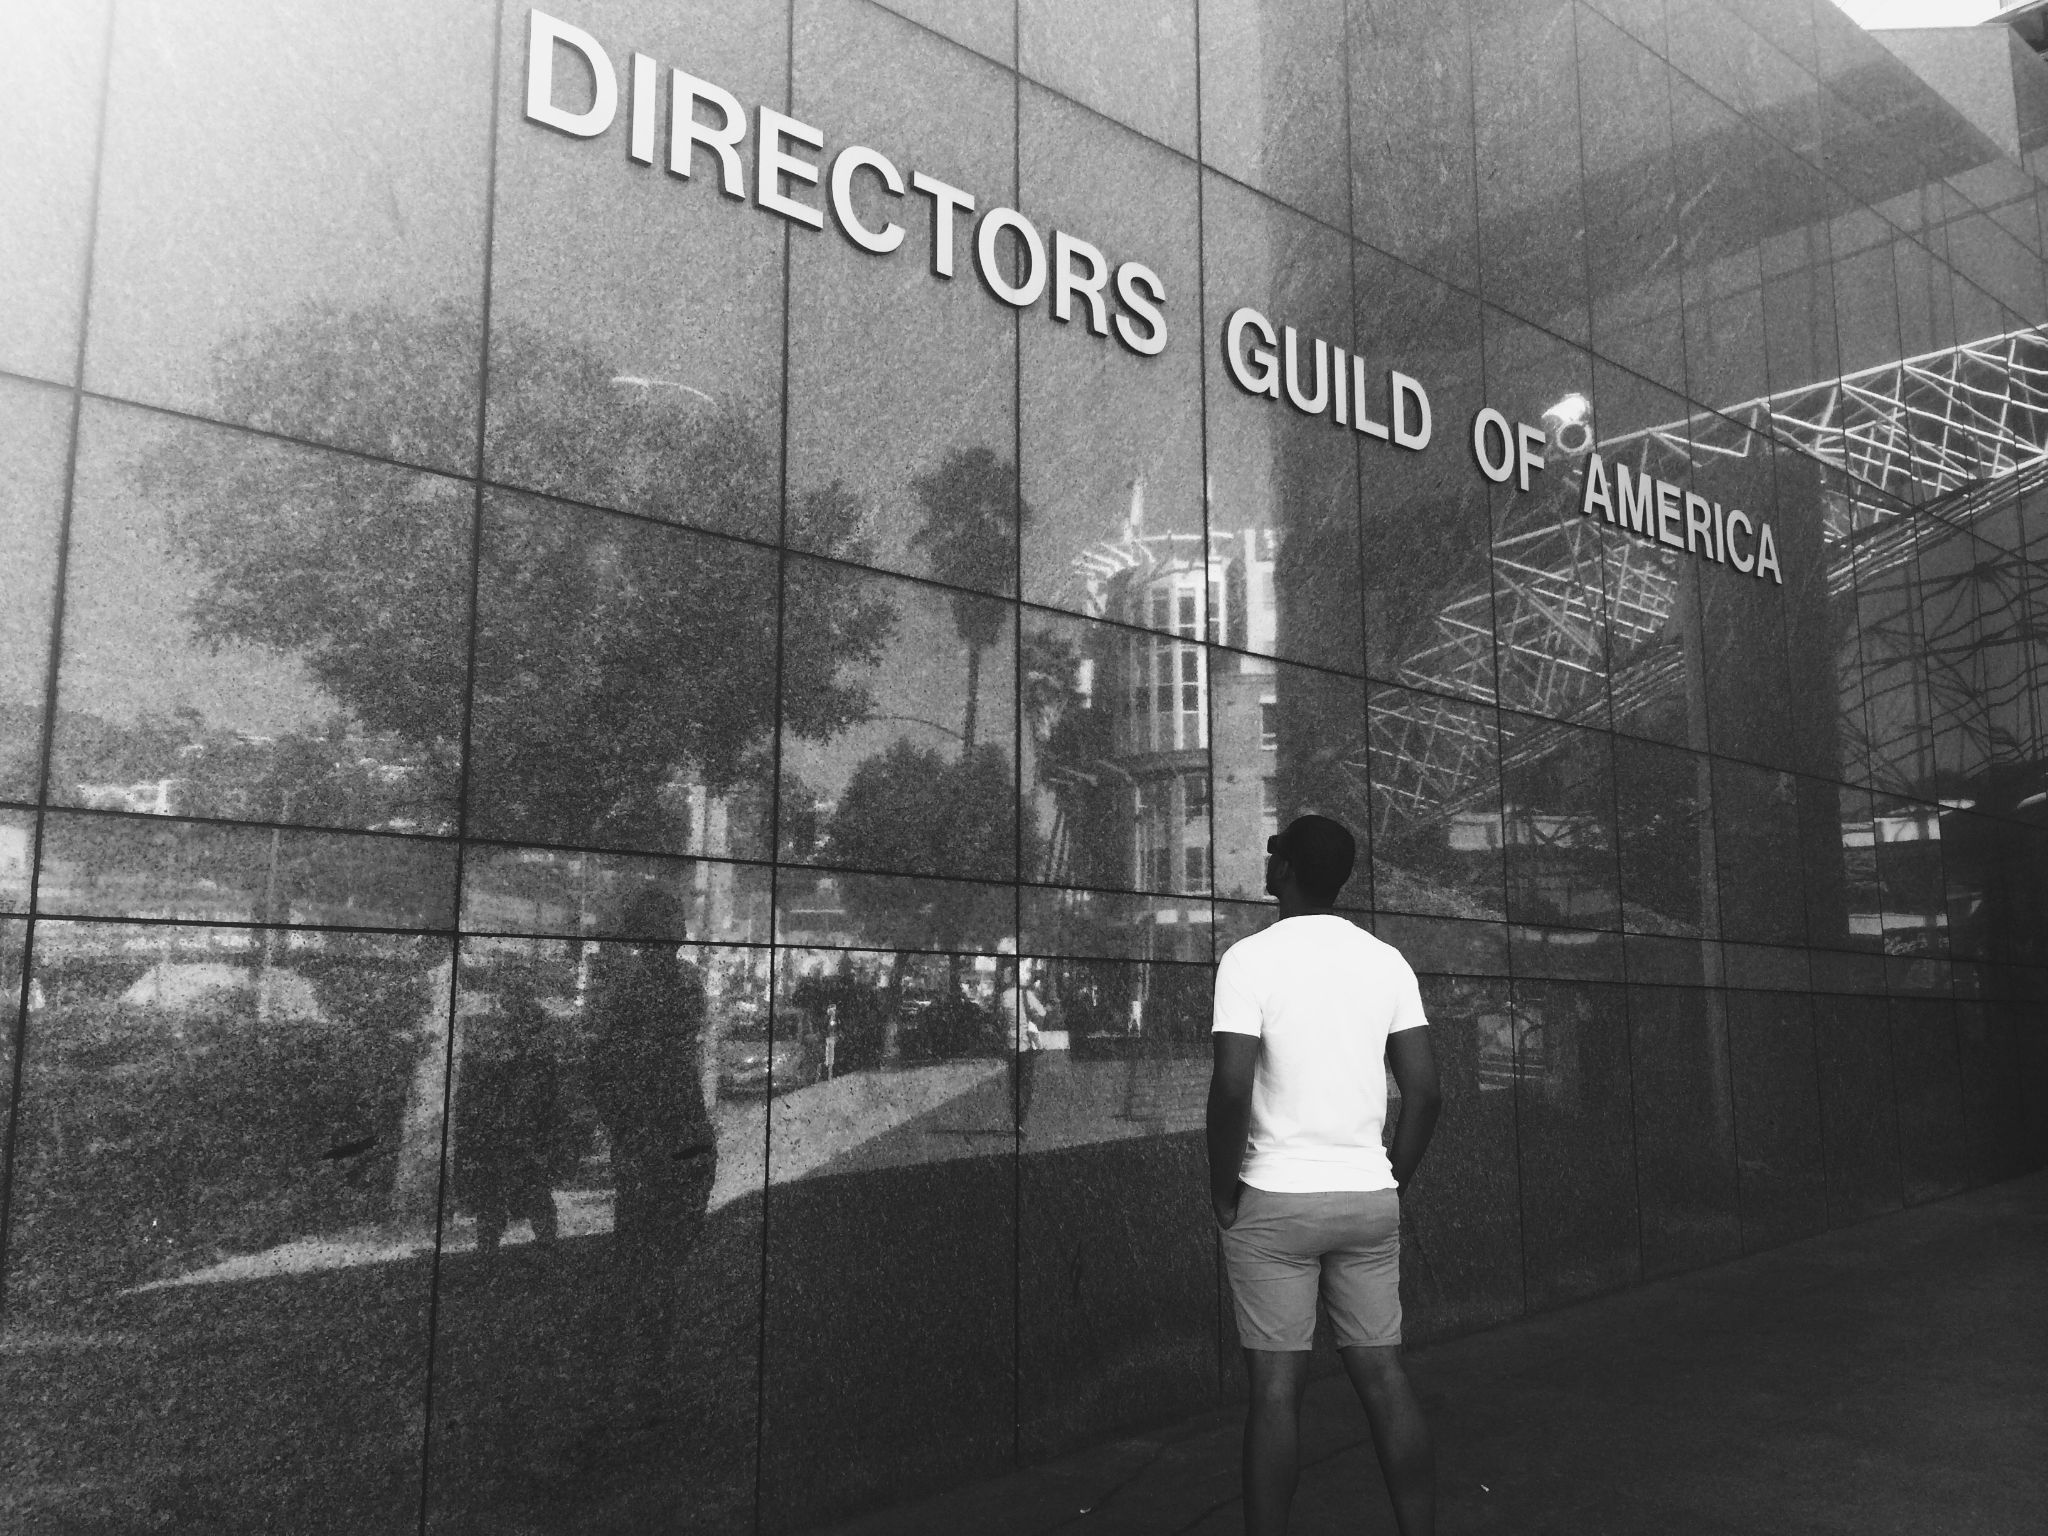 Joshua Otis Miller Chief Executive Officer in front of Director's Guild of America building in LA